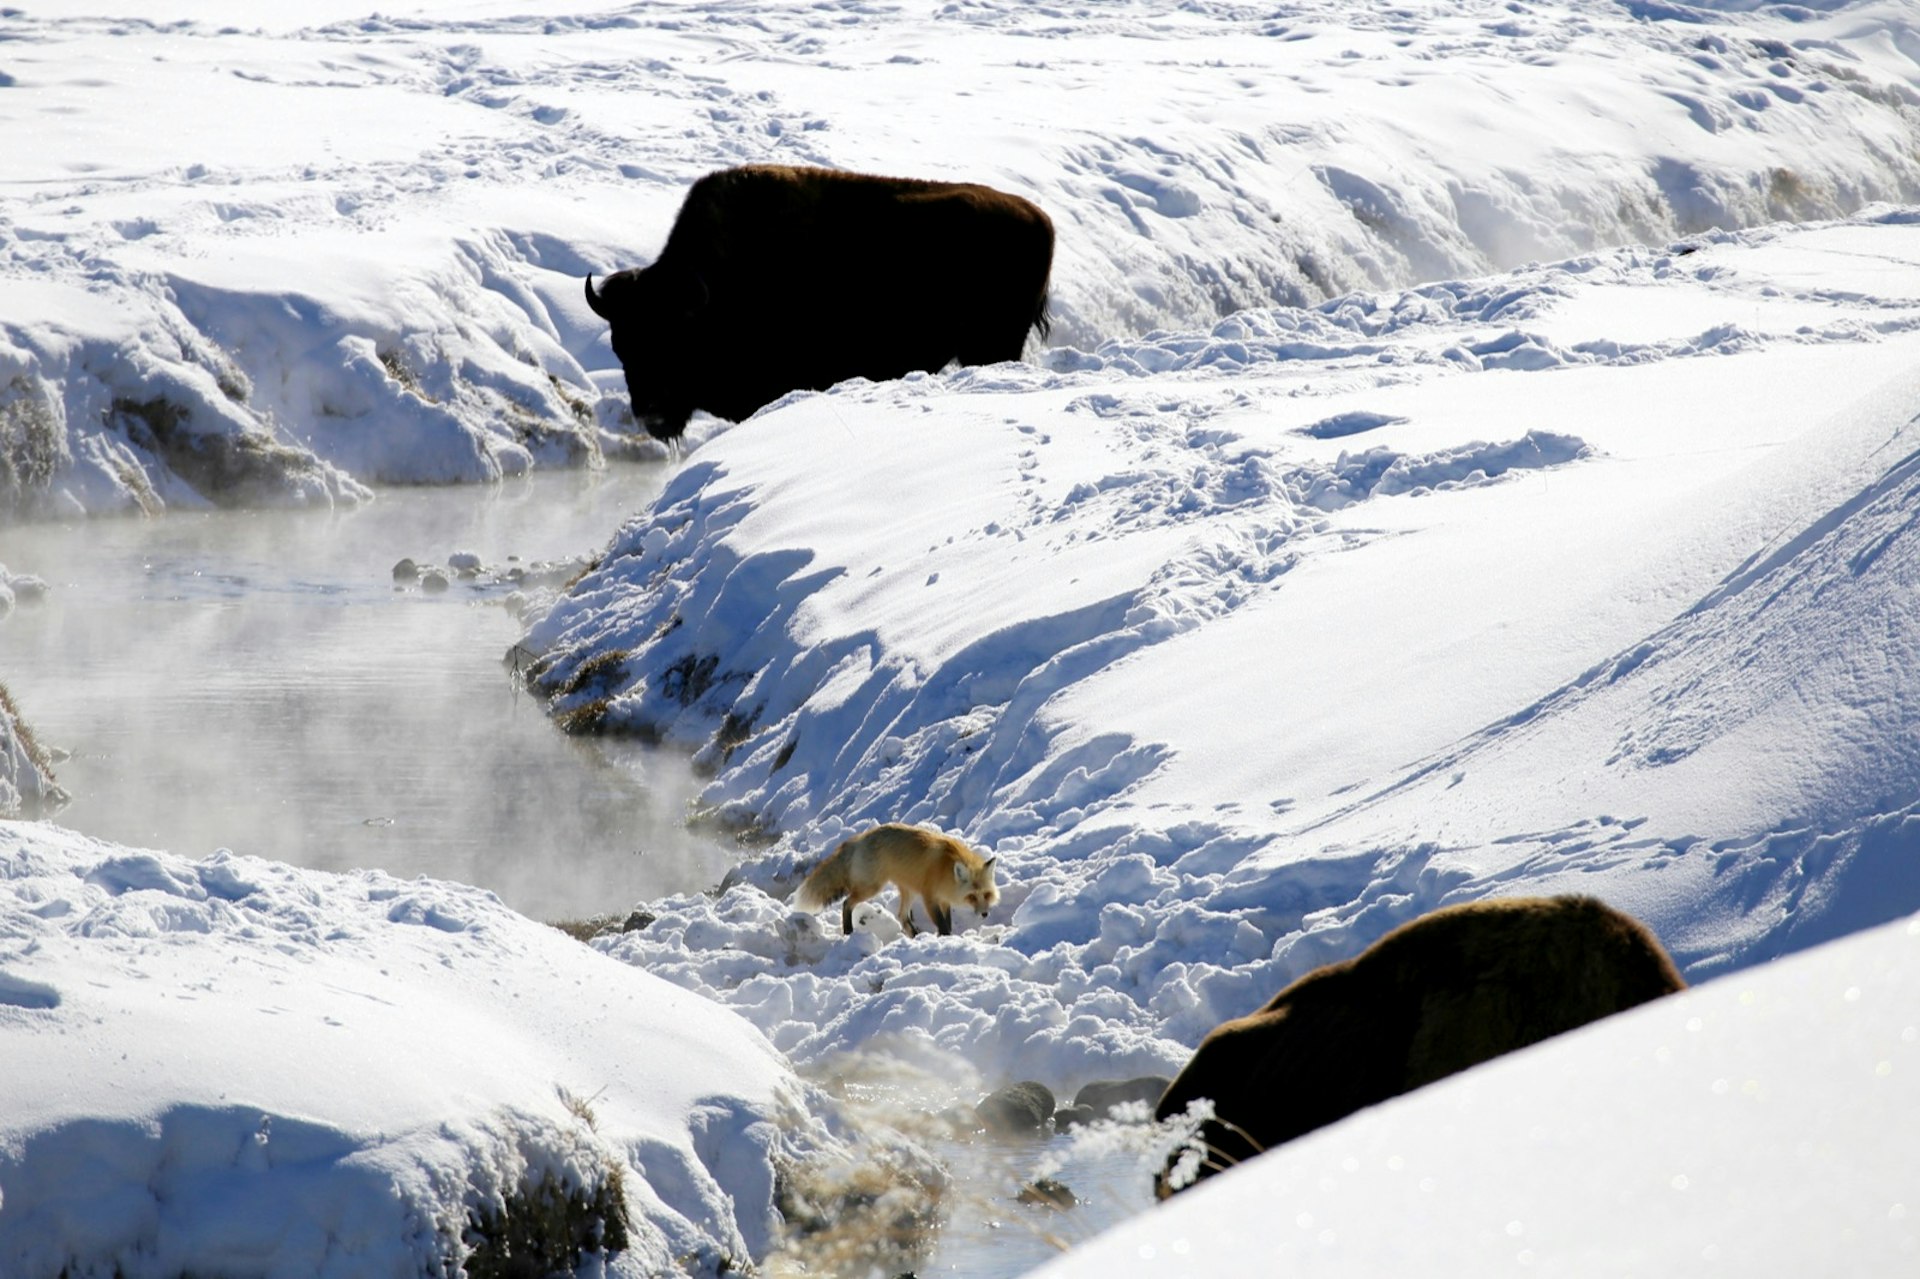 A red fox and two bison are silhouetted against a snow bank as they forage on the banks of a river; Yellowstone winter wildlife